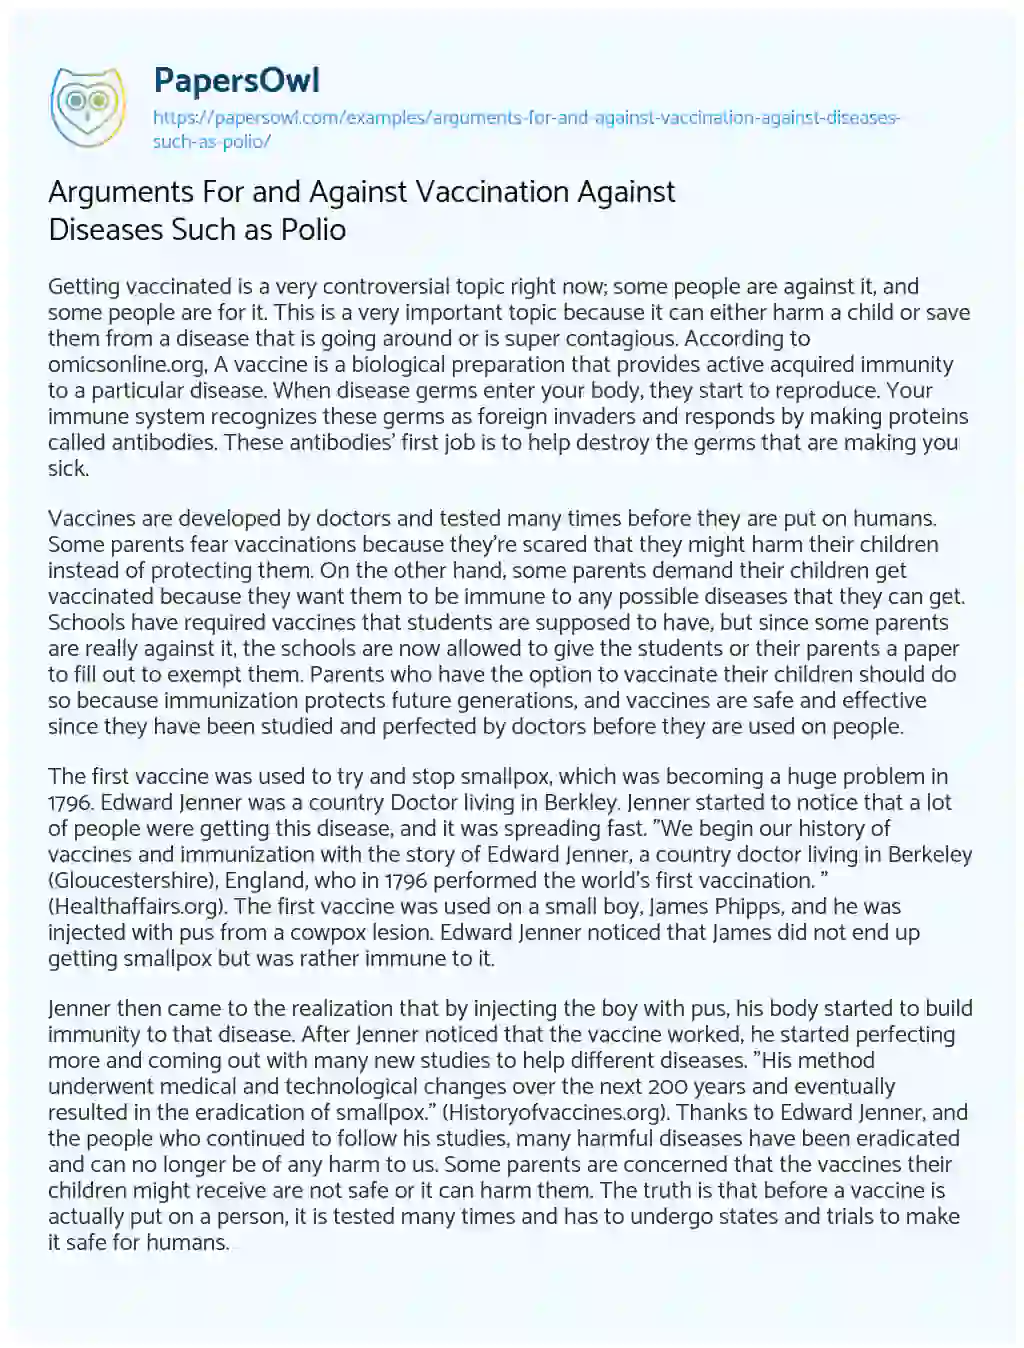 Essay on Arguments for and against Vaccination against Diseases such as Polio